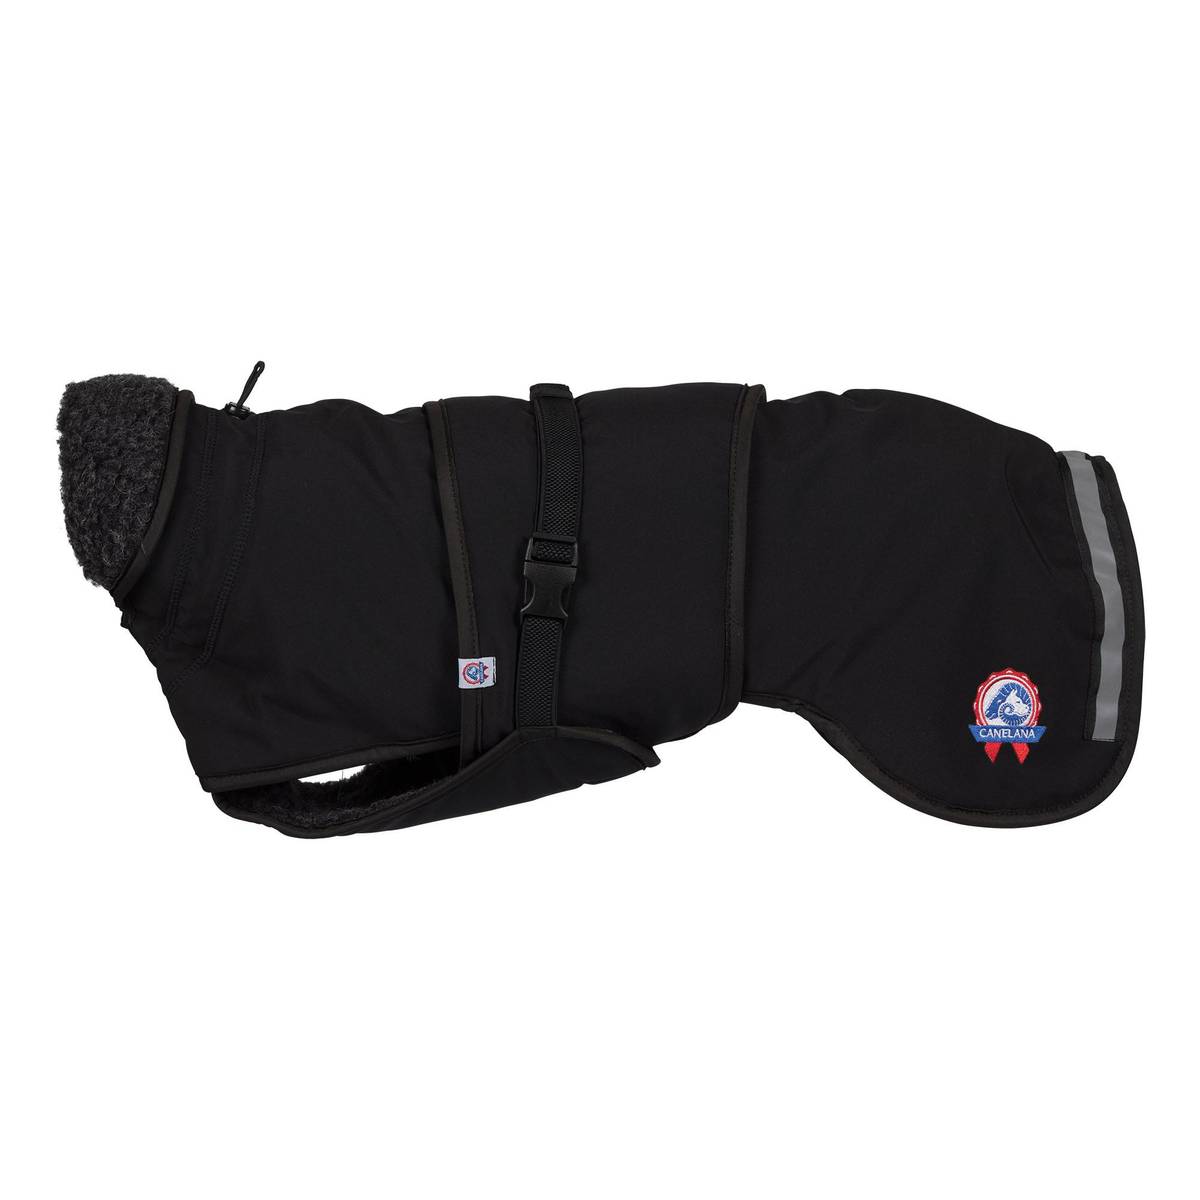 Canelana Thermo Sort S/M terrier